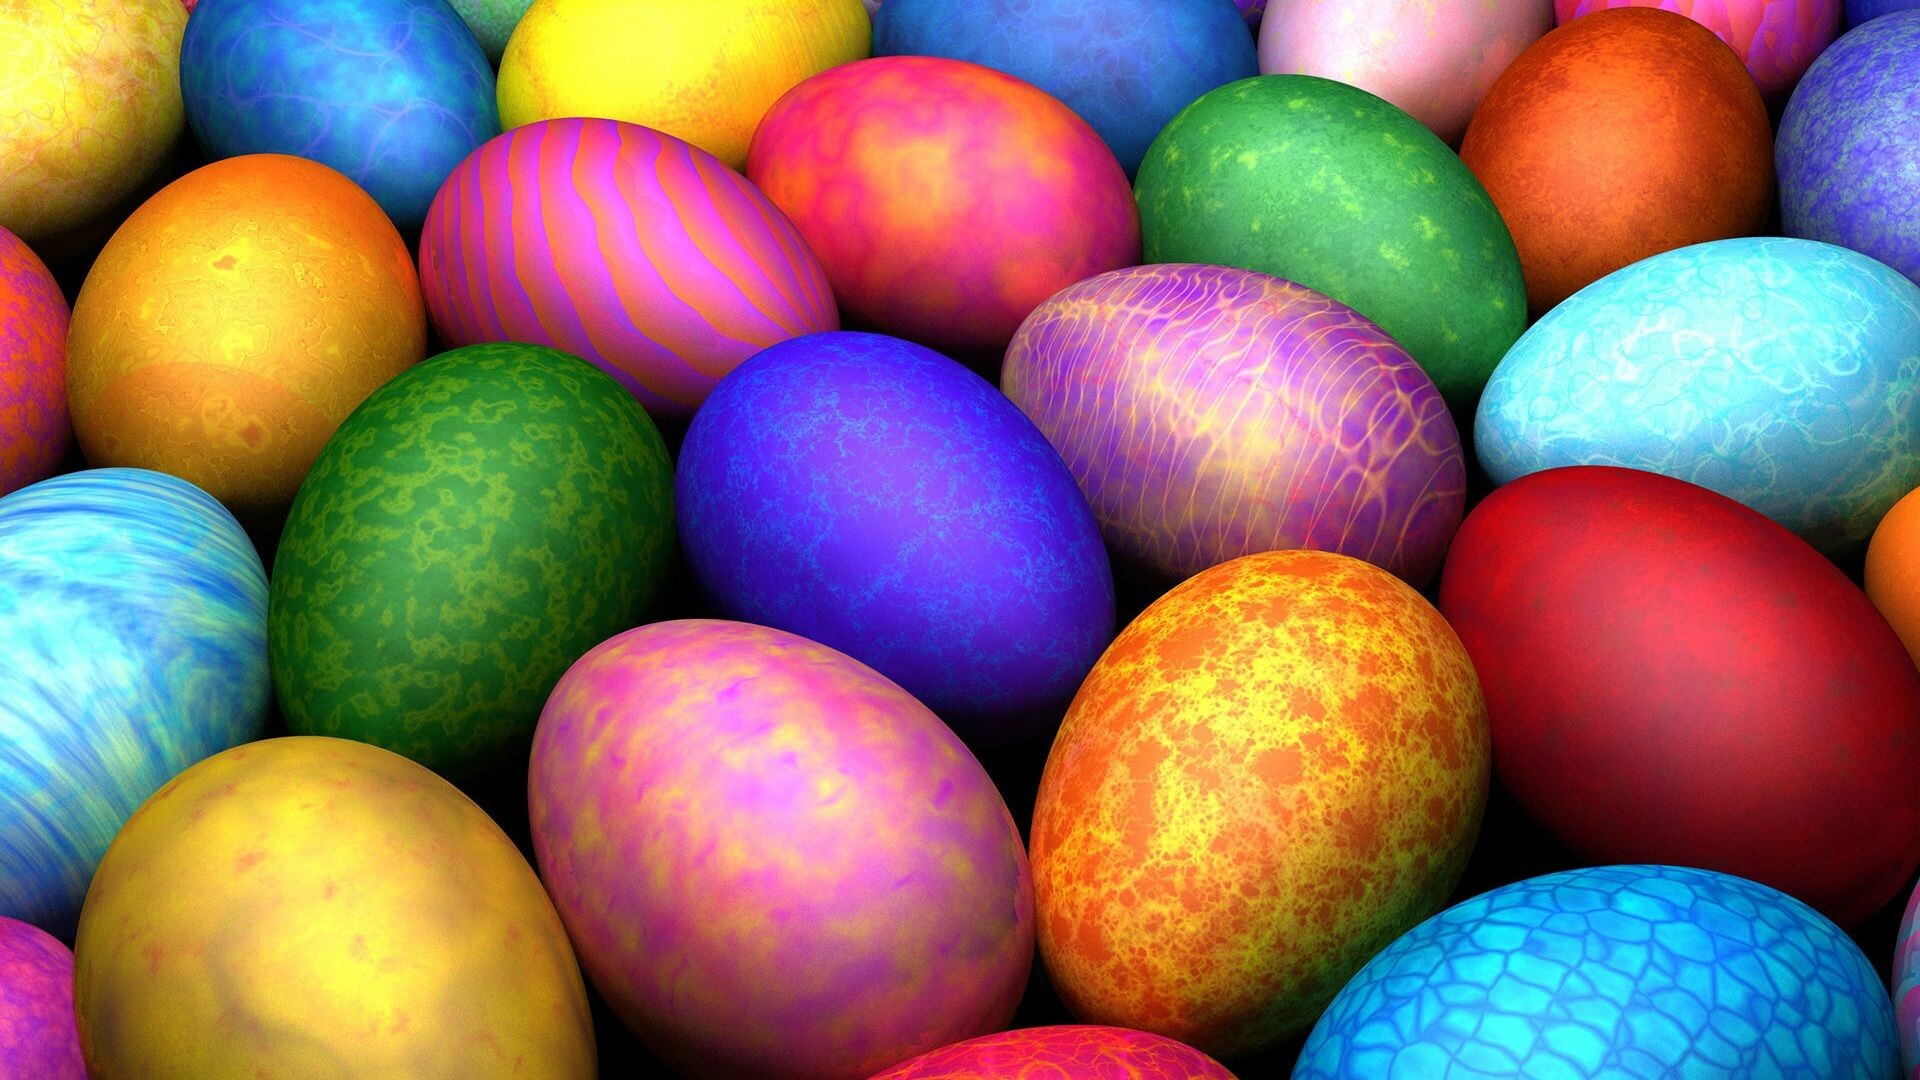 69+ Easter Wallpapers: HD, 4K, 5K for PC and Mobile | Download free images  for iPhone, Android